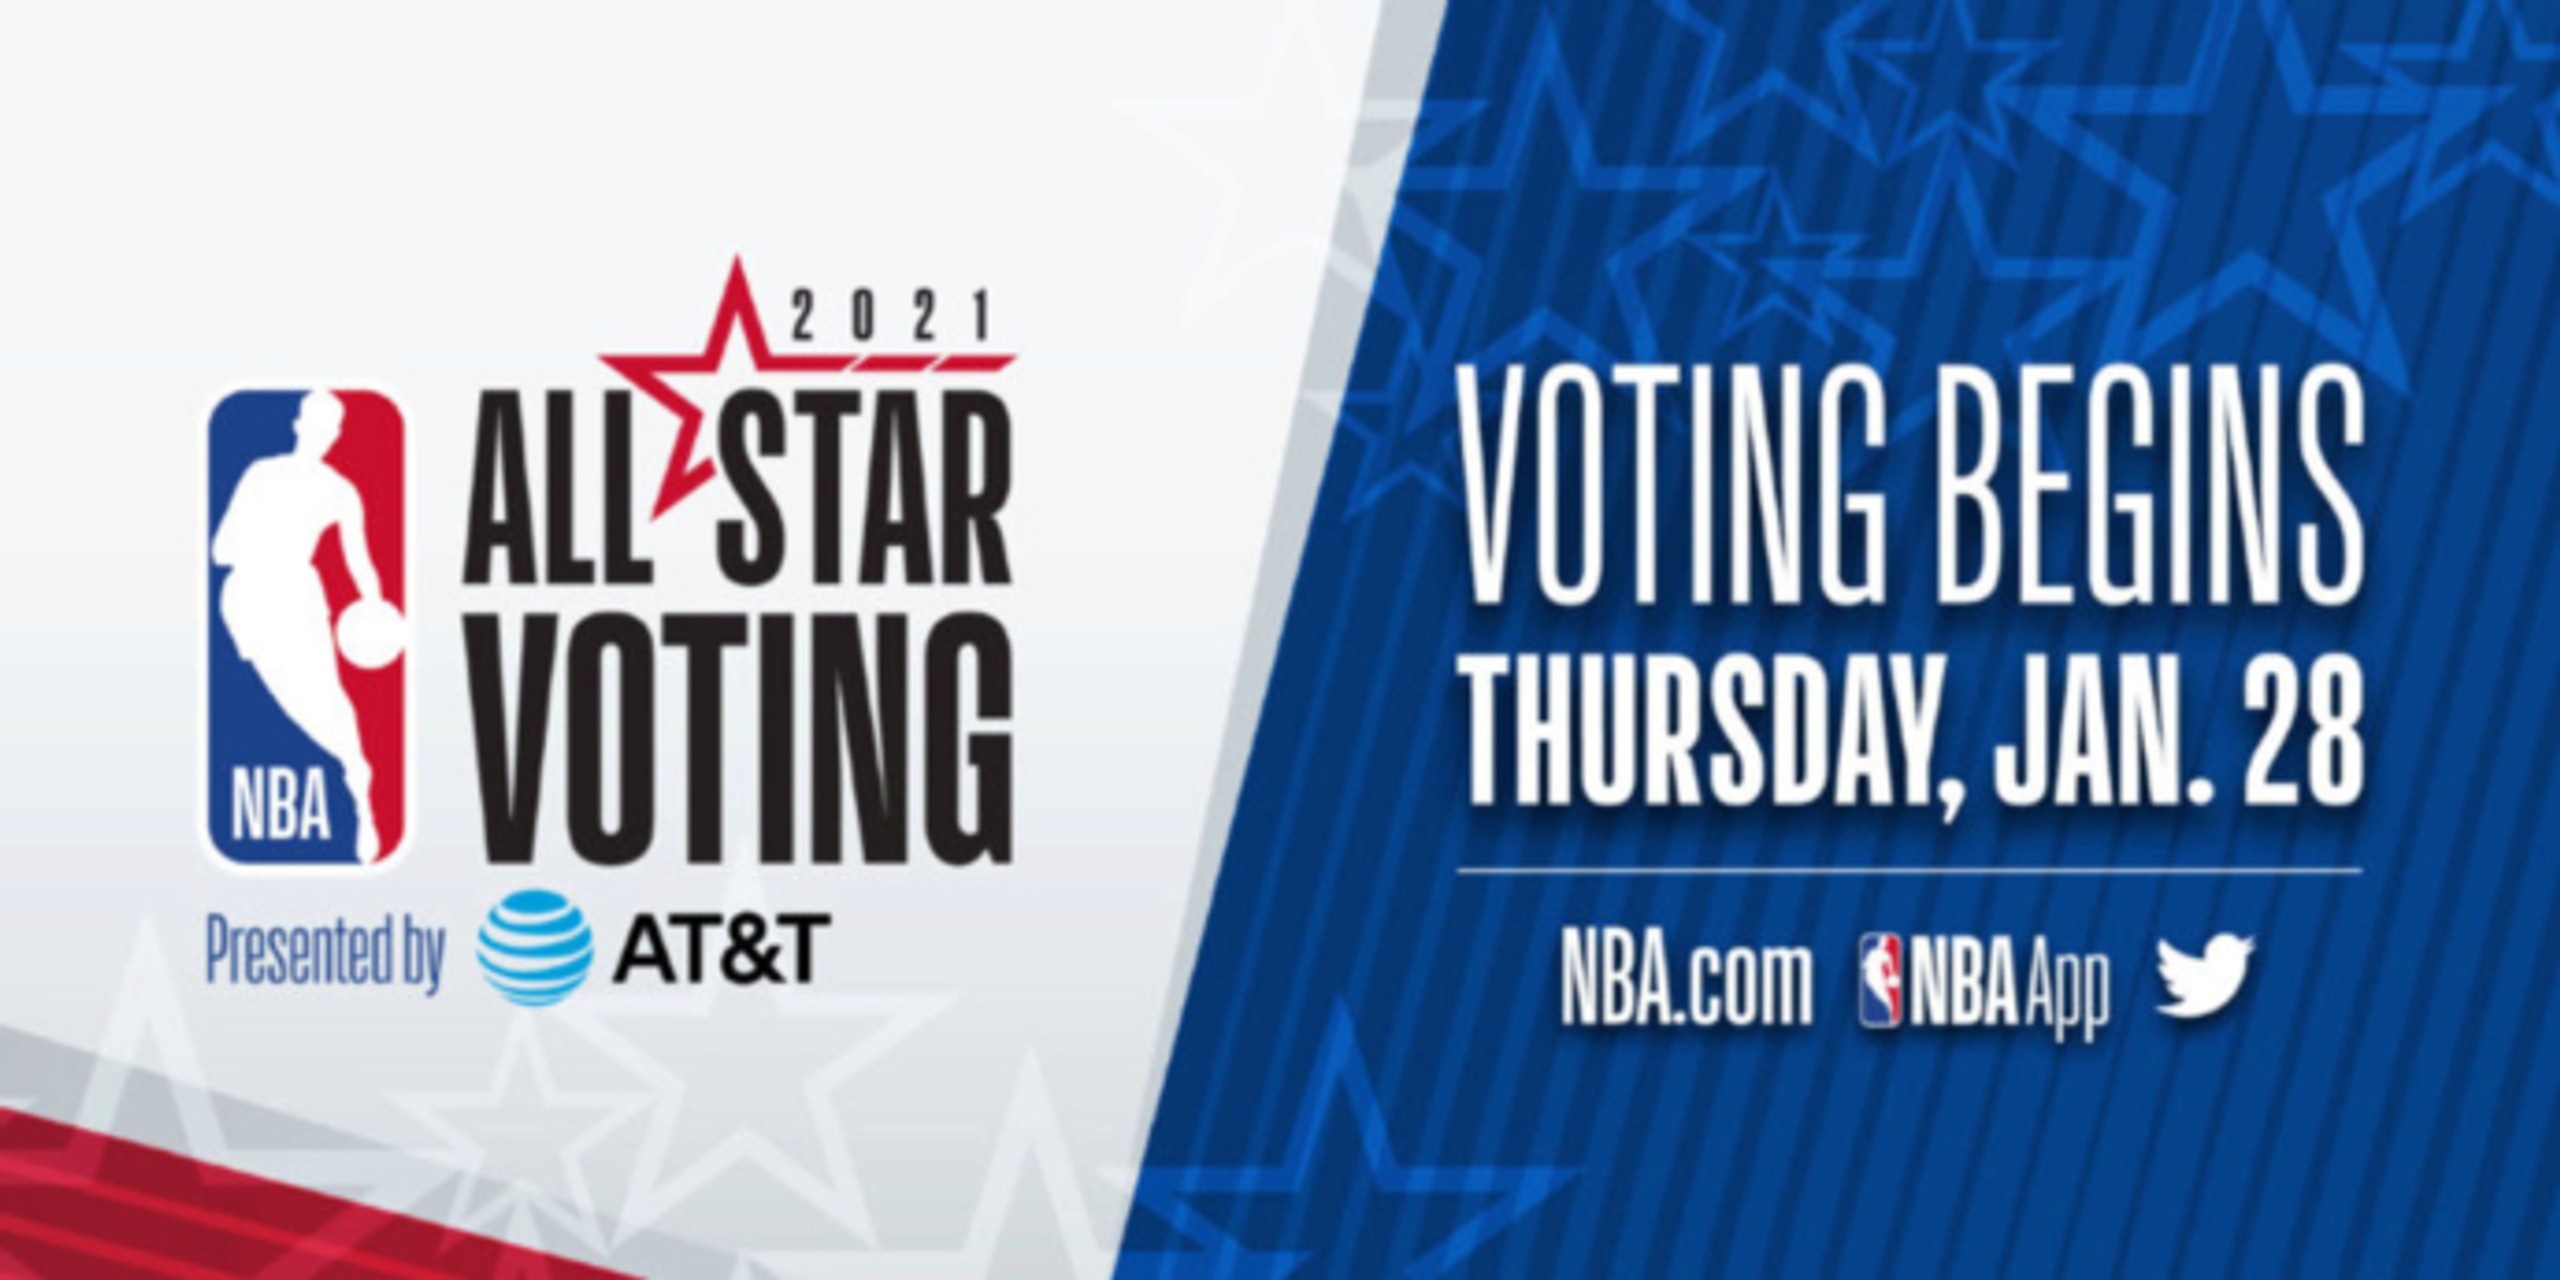 NBA announces All-Star voting to begin Thursday at noon